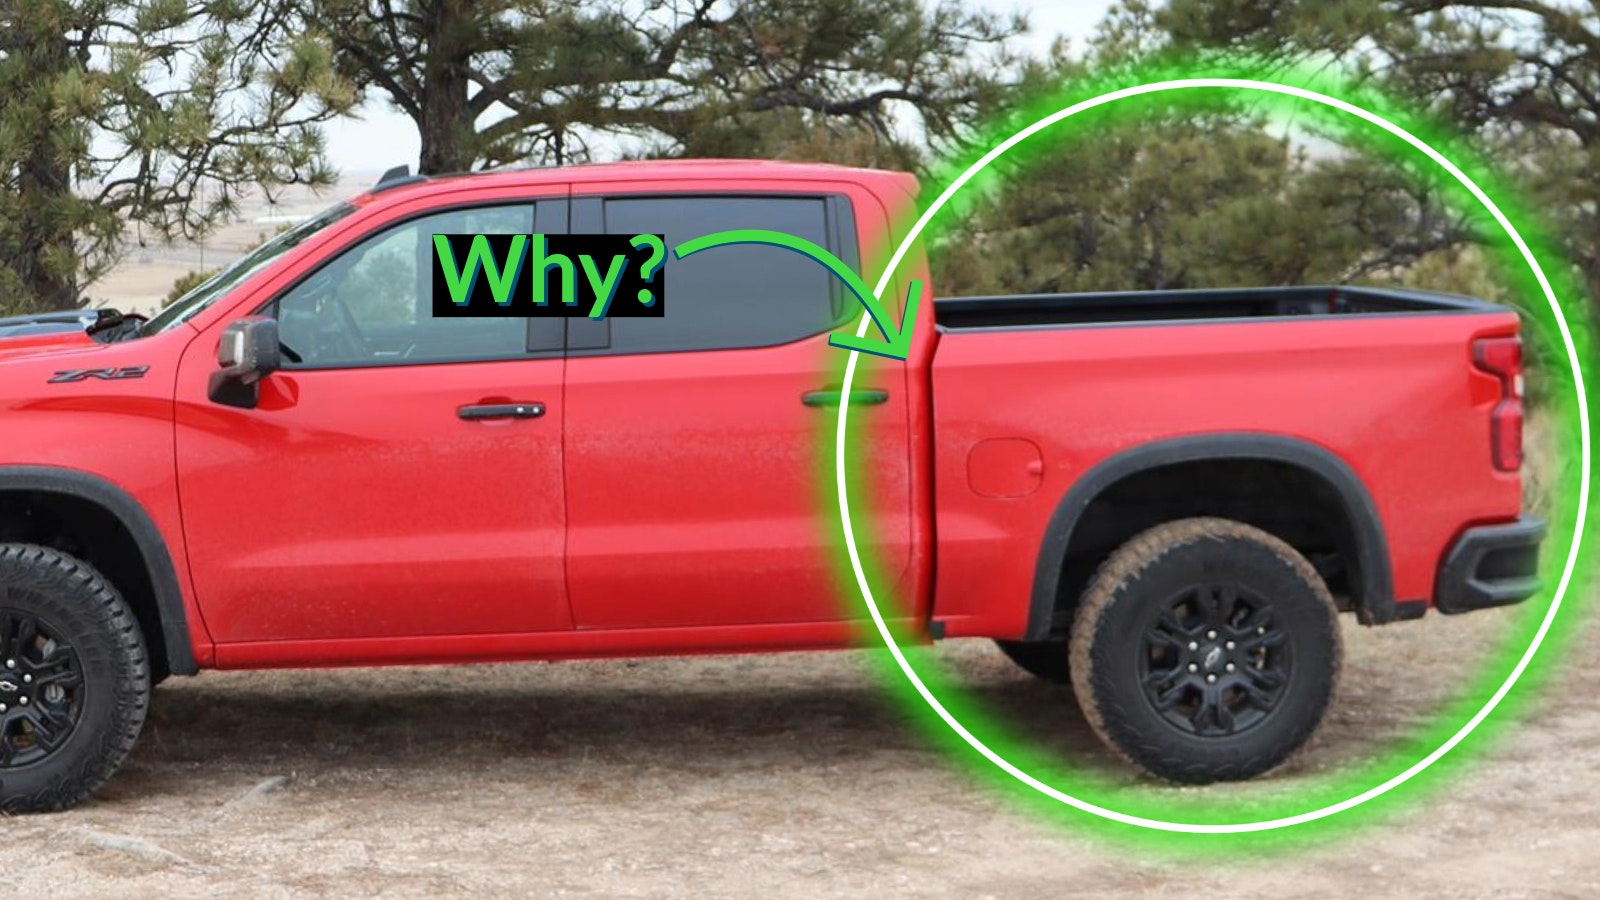 The design of a body-on-frame vehicle like a pickup truck results in a higher center of gravity but also a stronger longitudinal strength for the vehicle.